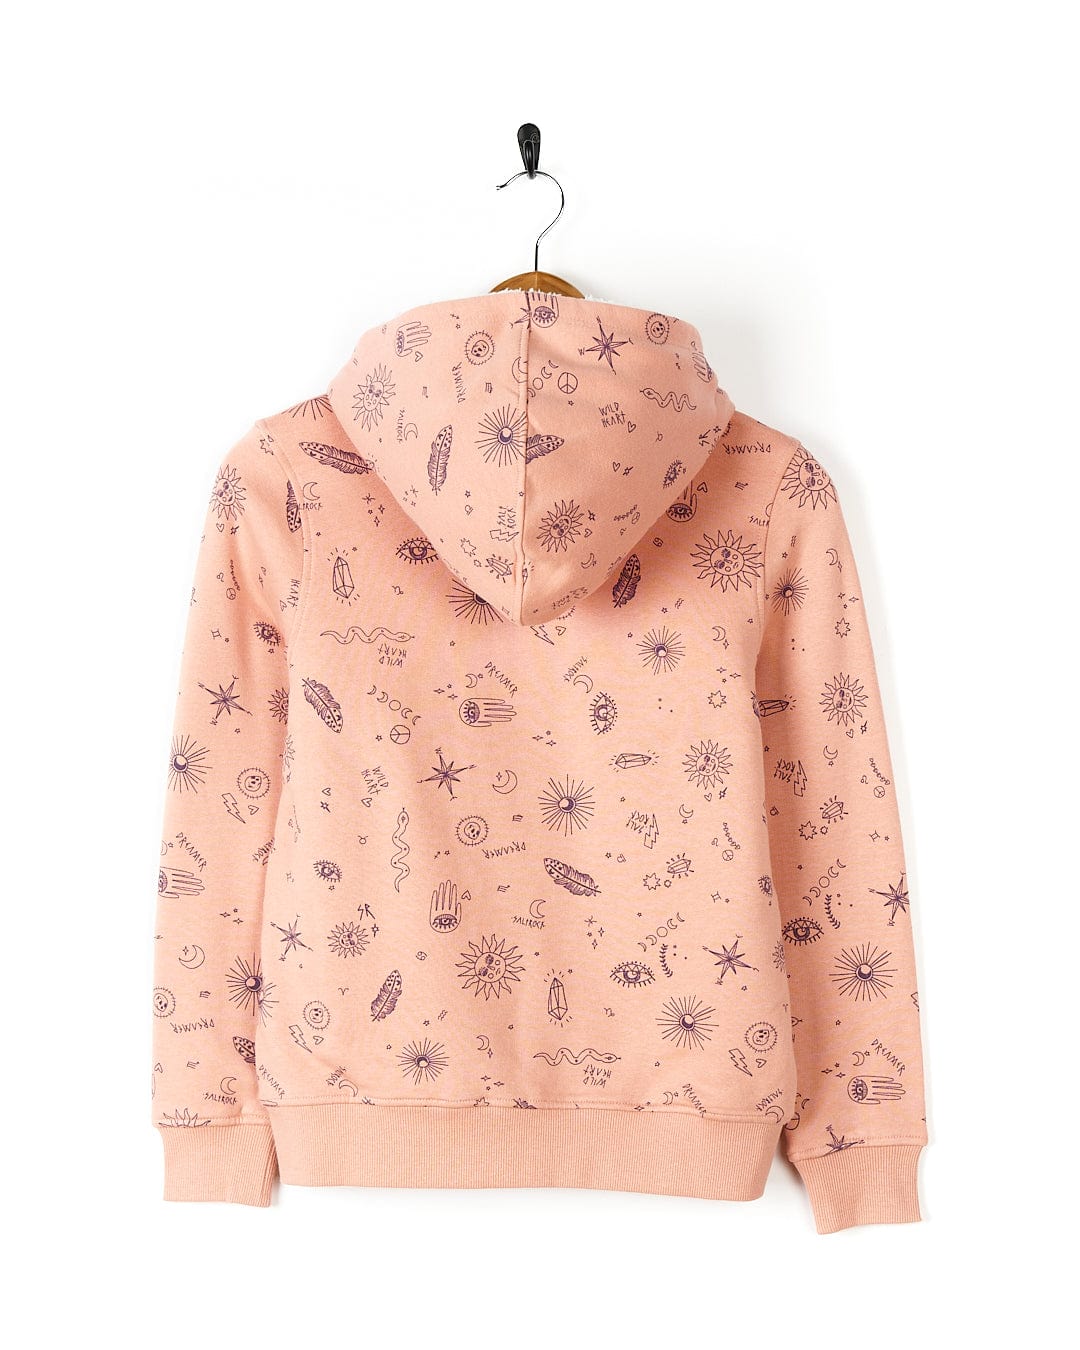 A girl's Wild Heart - Kids Borg Lined Hoodie - Pink by Saltrock, with flowers on it, perfect for the wild heart.